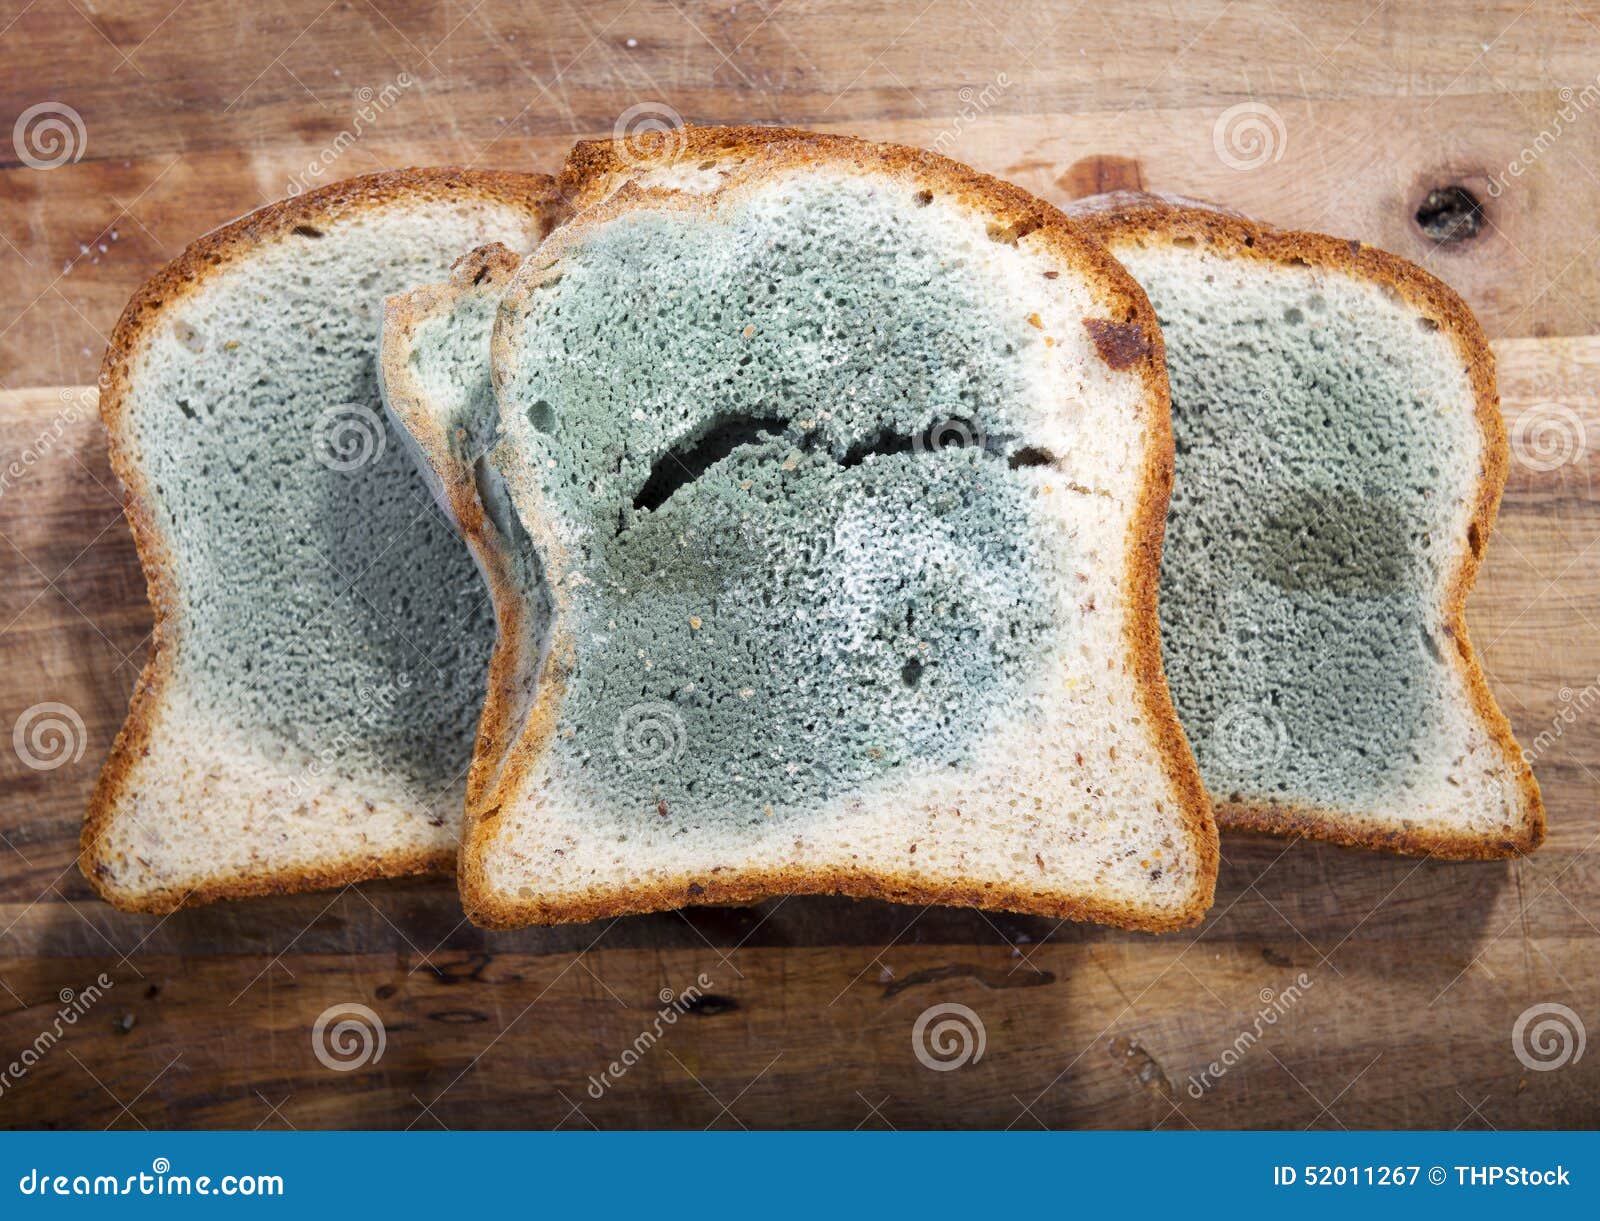 Moldy Bread stock image. Image of closeup, microorganism - 52011267